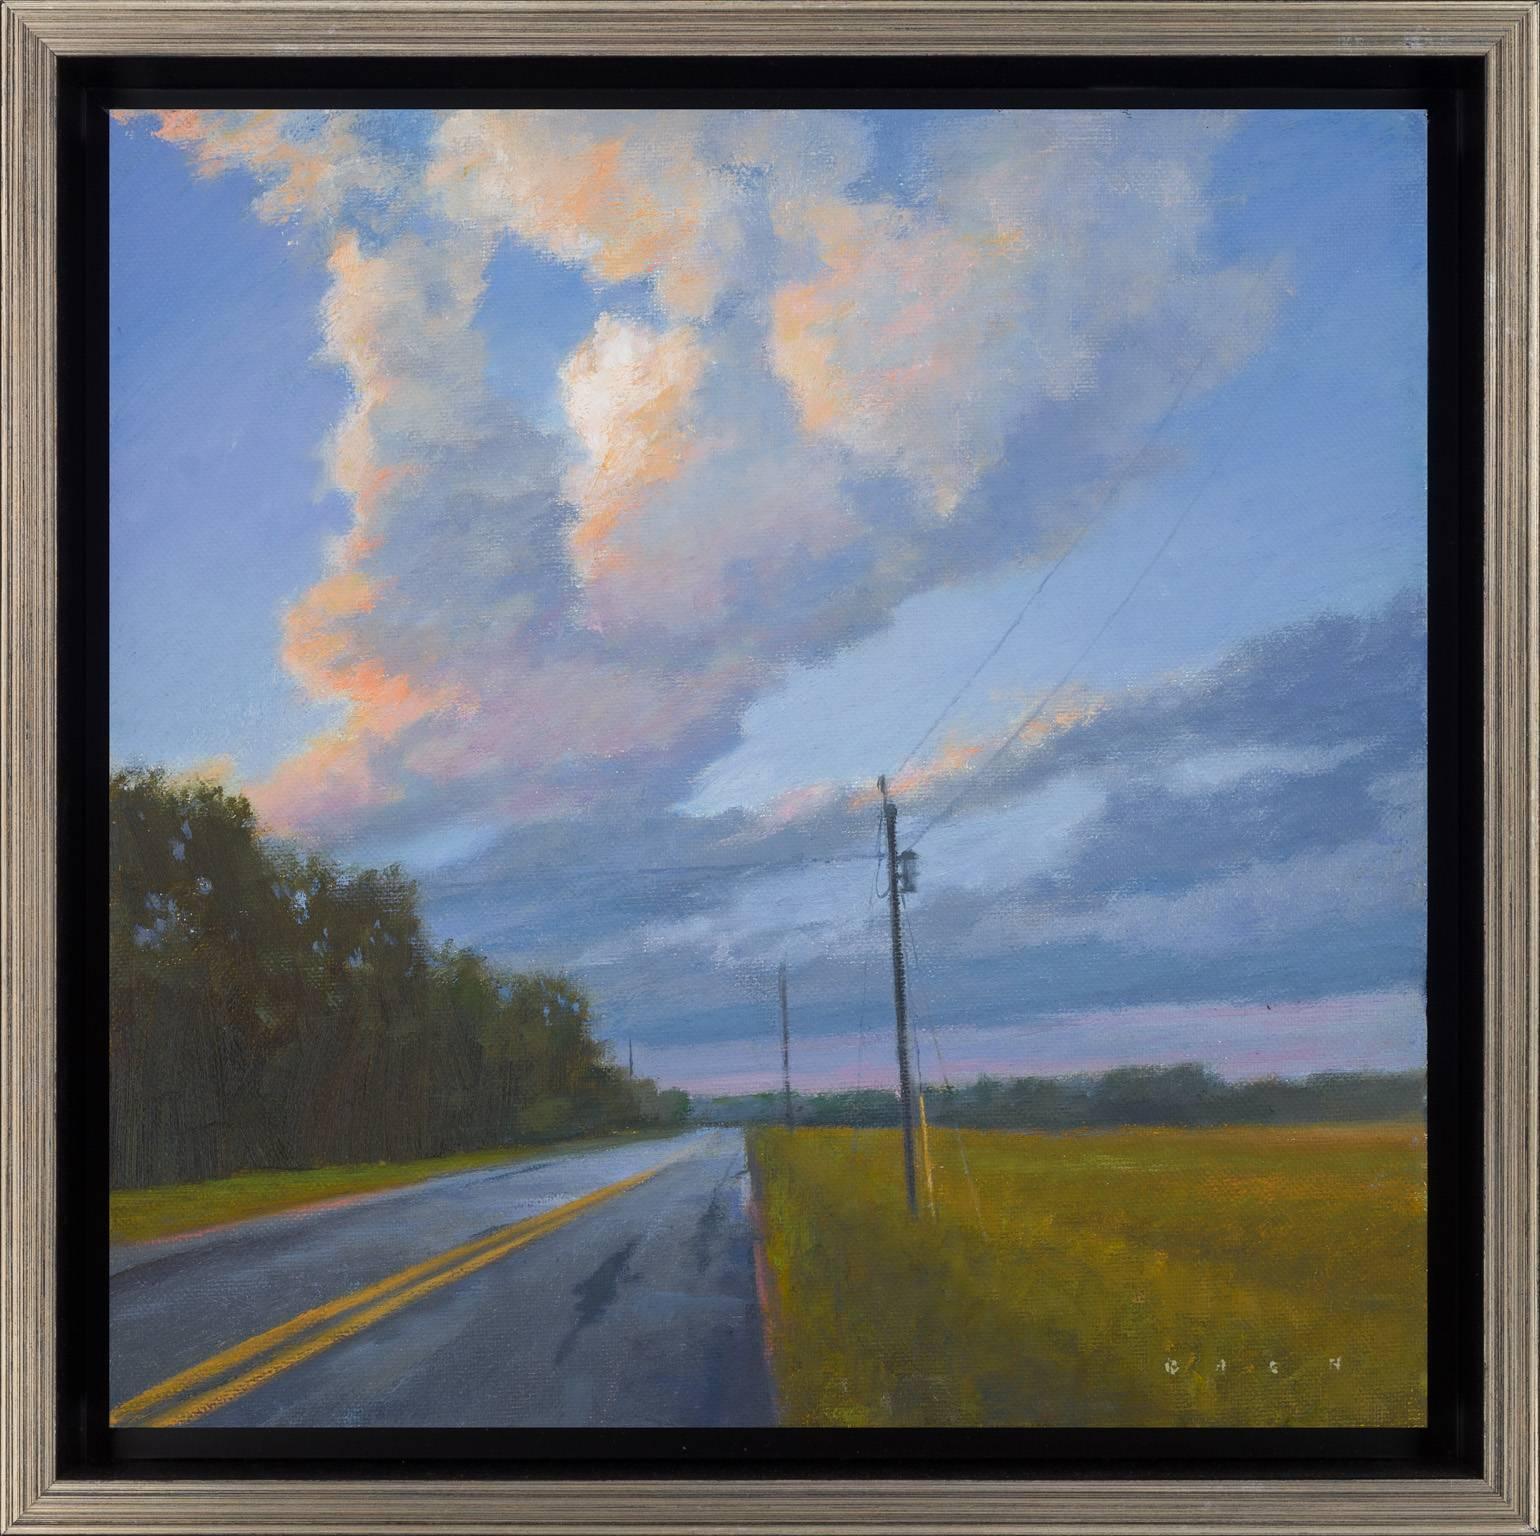 Stephen Bach Landscape Painting - Wet Highway